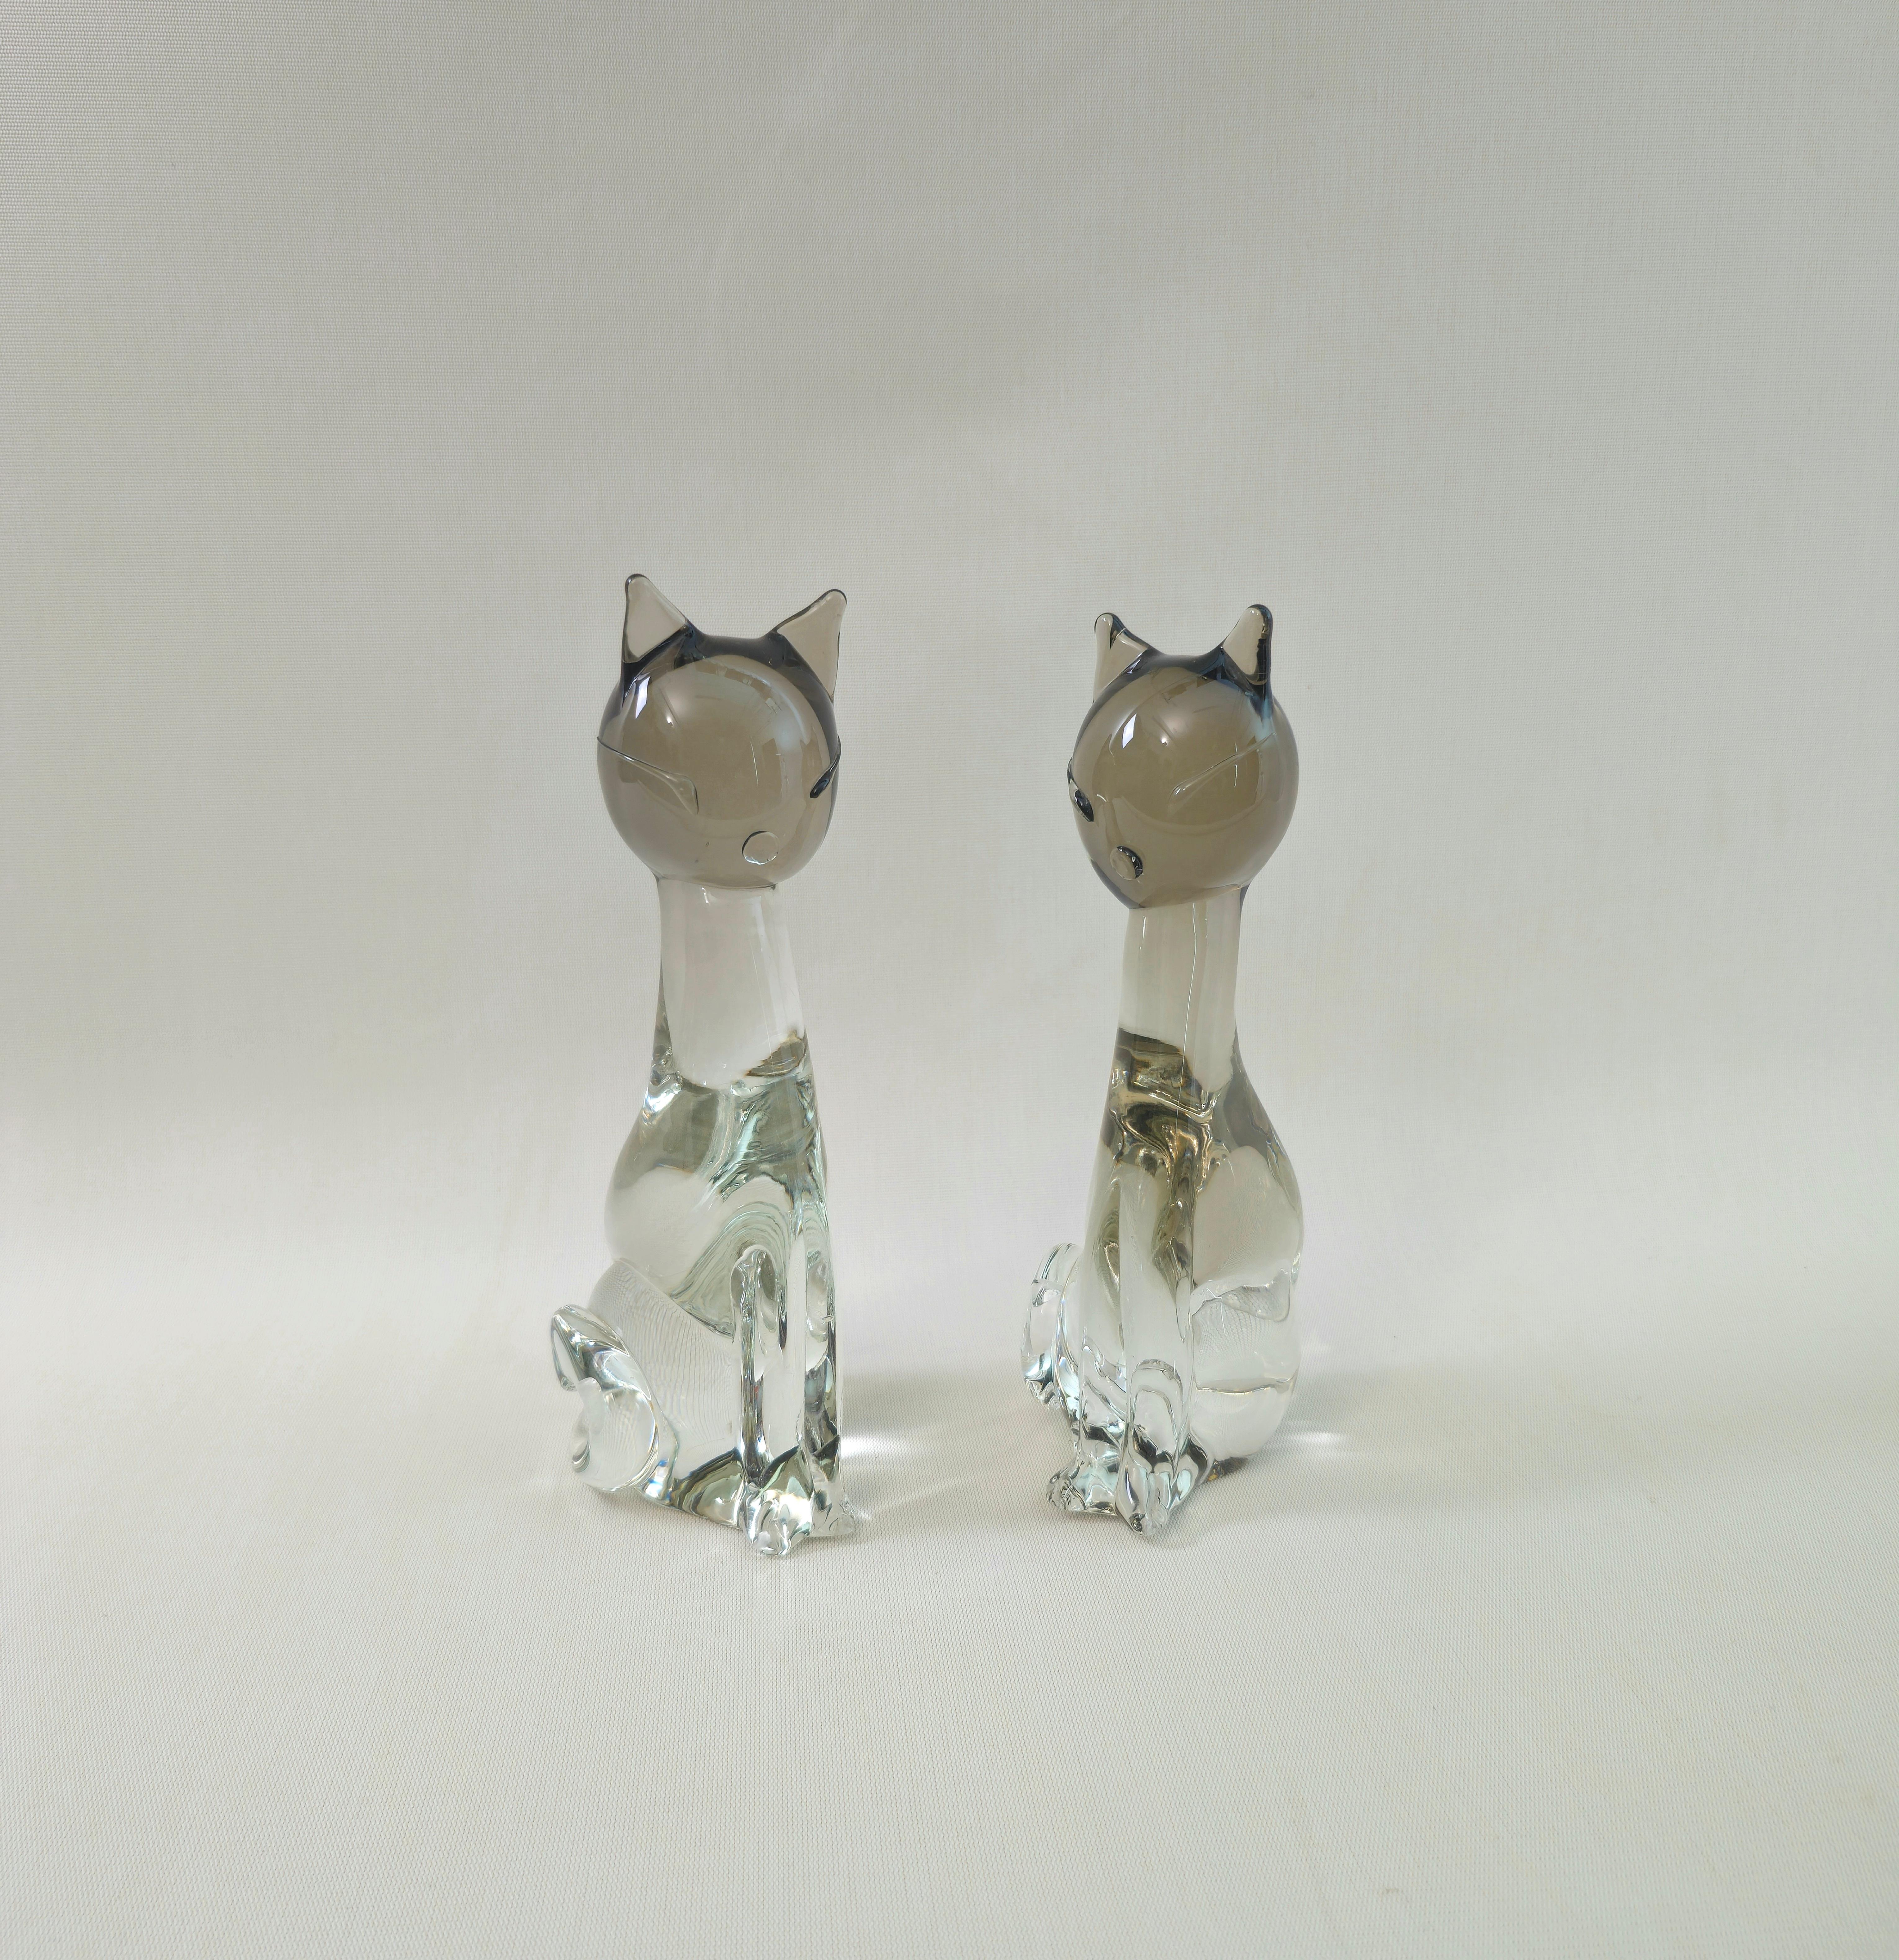 Set of 2 sculptural cats/decorative objects Produced in Italy in the 70s by Licio Zanetti. Signature embossed on the bottom of the base.
Each individual cat was made of two-tone Murano glass, the upper part in the shade of smoky and the lower part